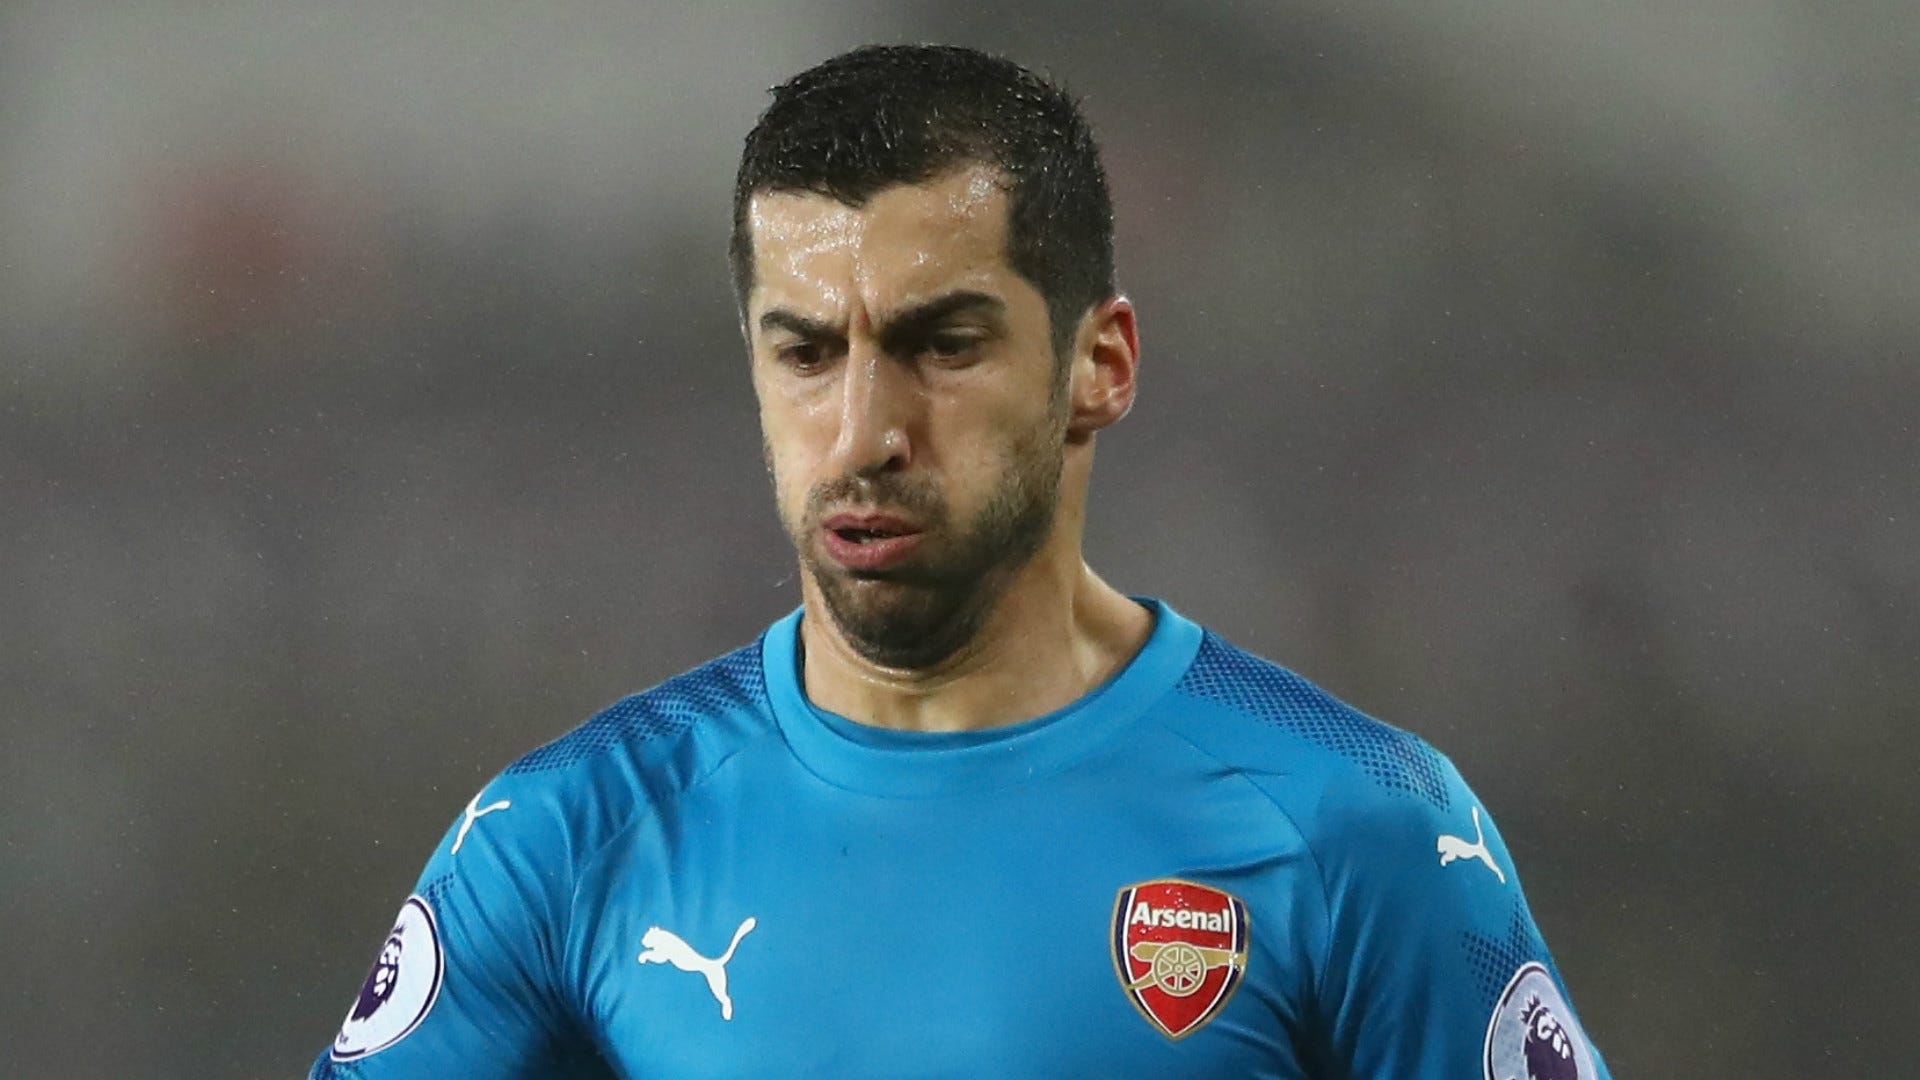 Had Mkhitaryan been among Ukrainian club players, everything would have  been different – retired ex-USSR international